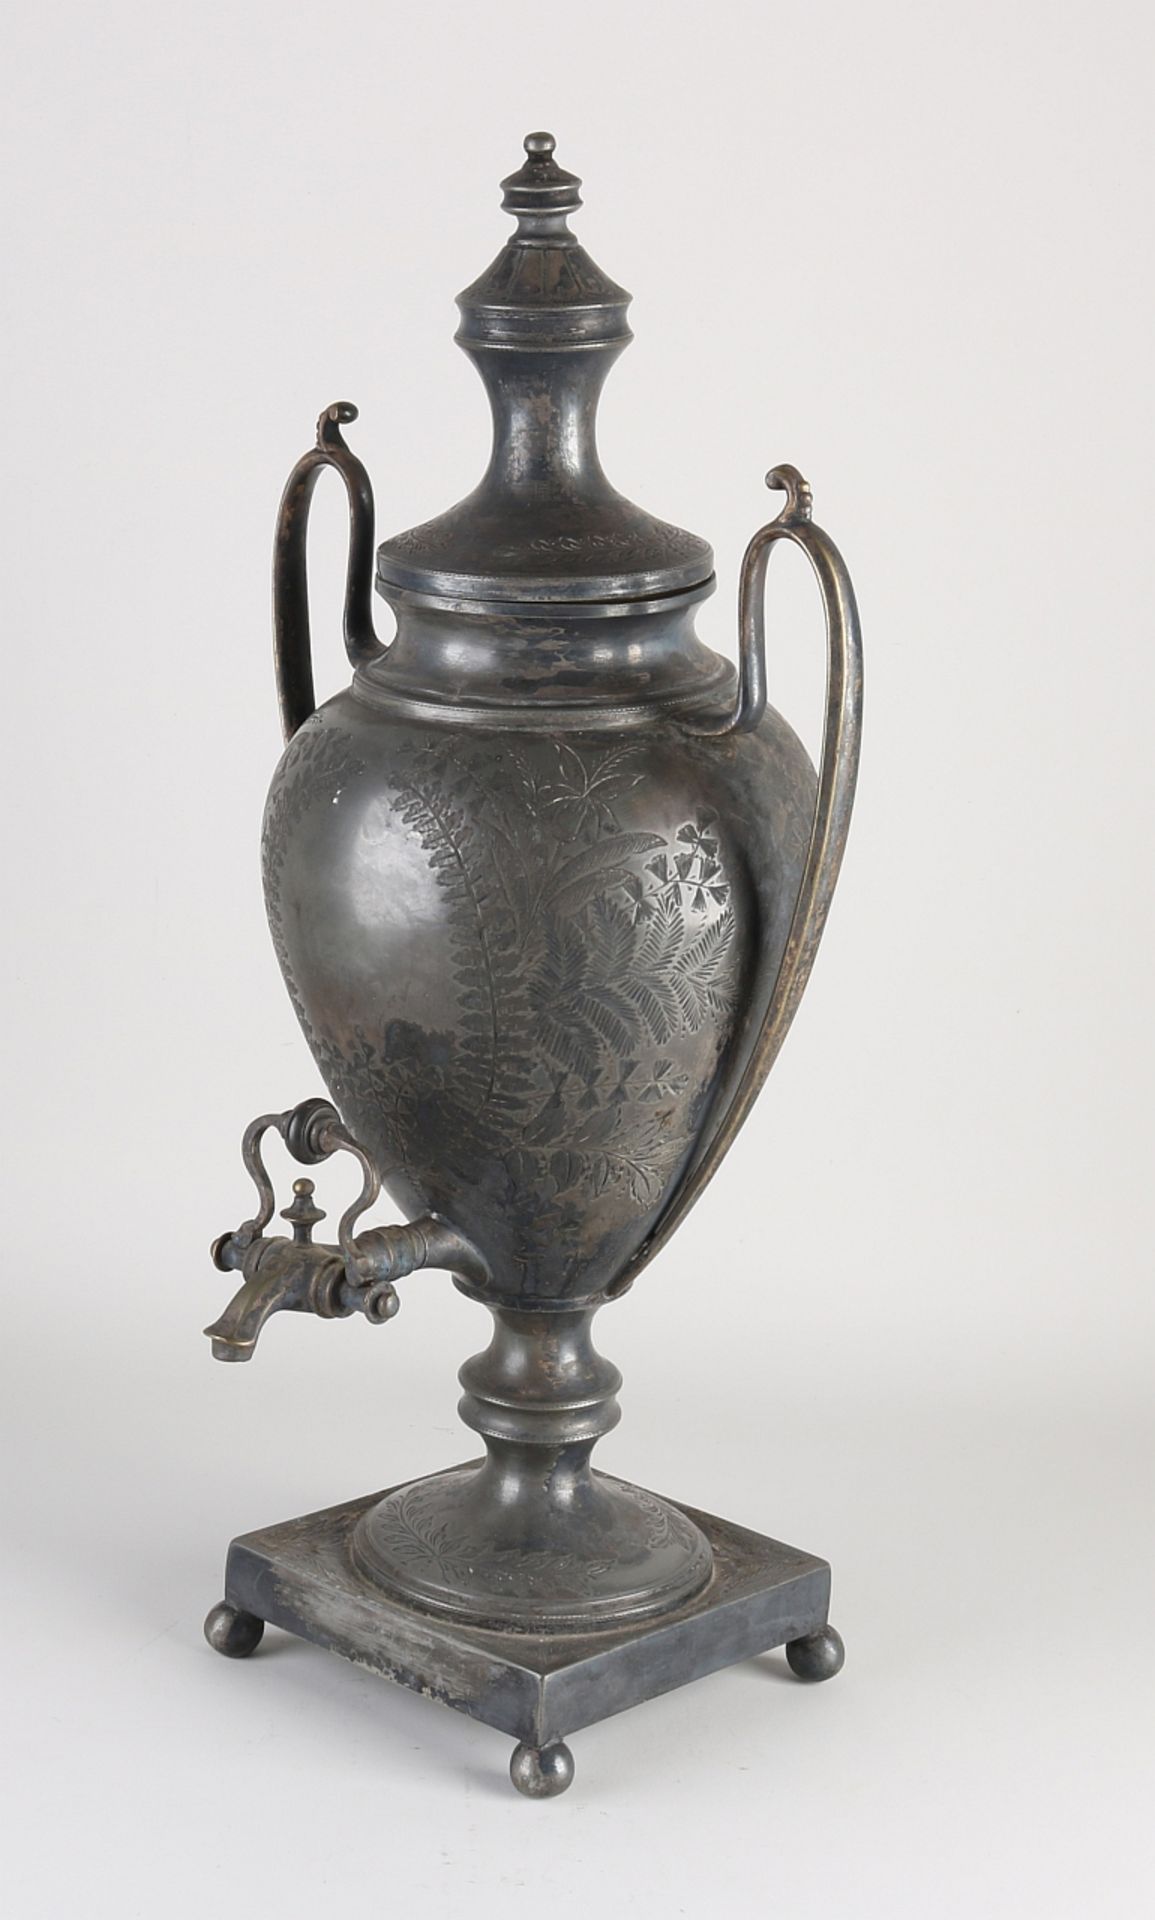 Antique plated tap jug, 1800